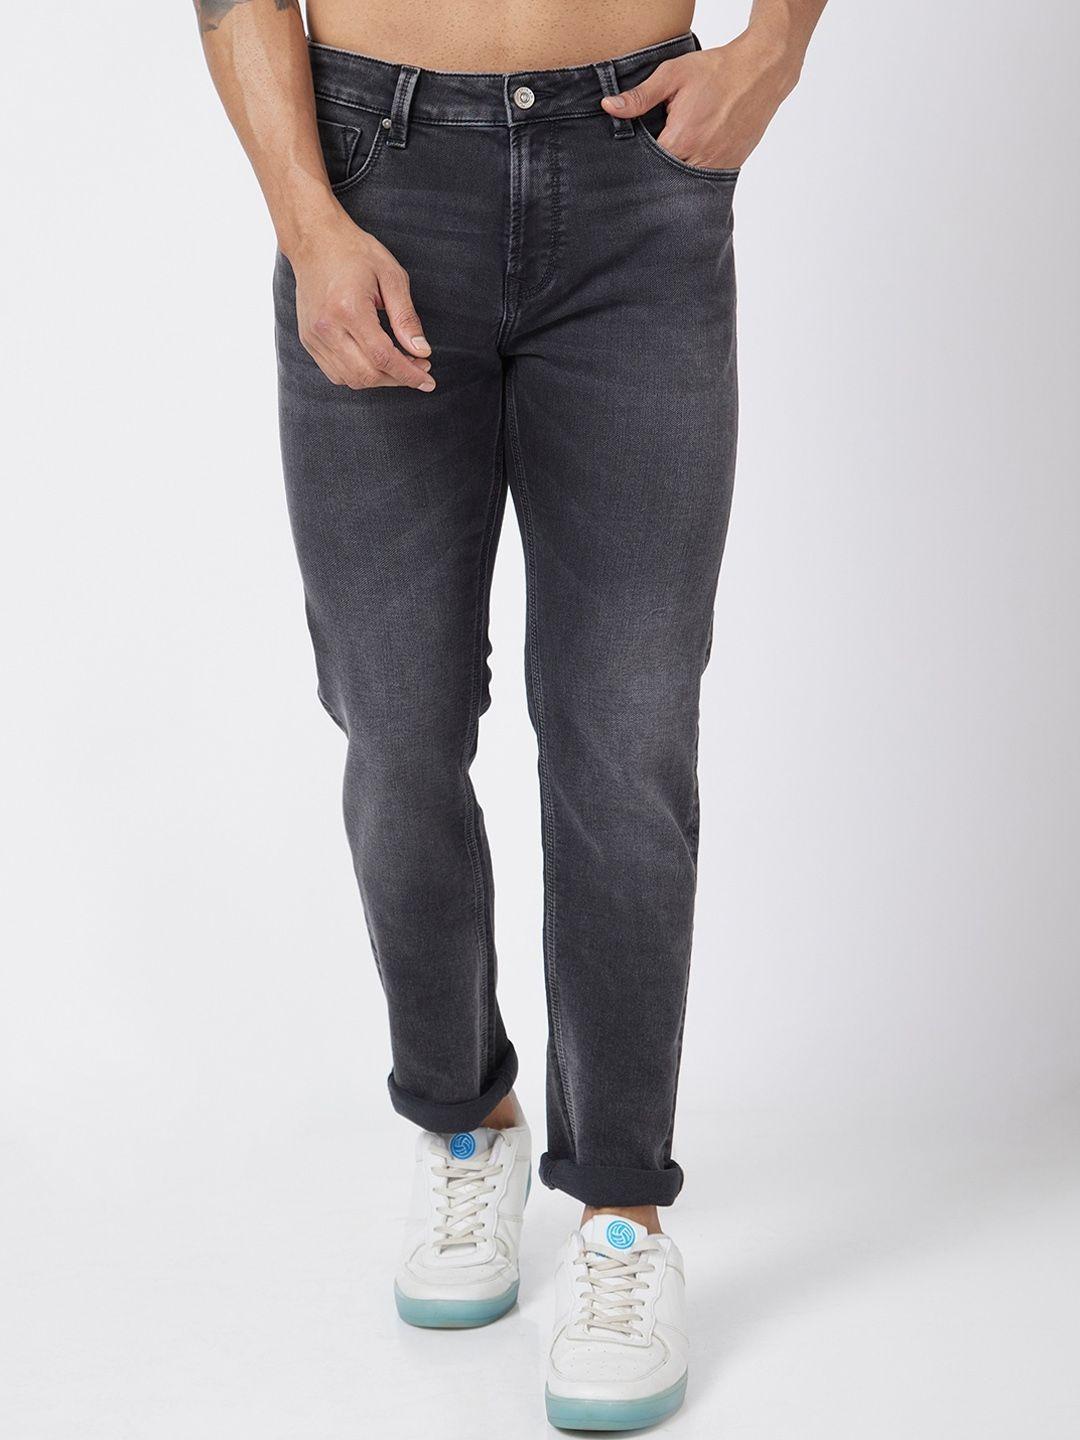 spykar-men-cotton-relaxed-fit-clean-look-light-fade-jeans